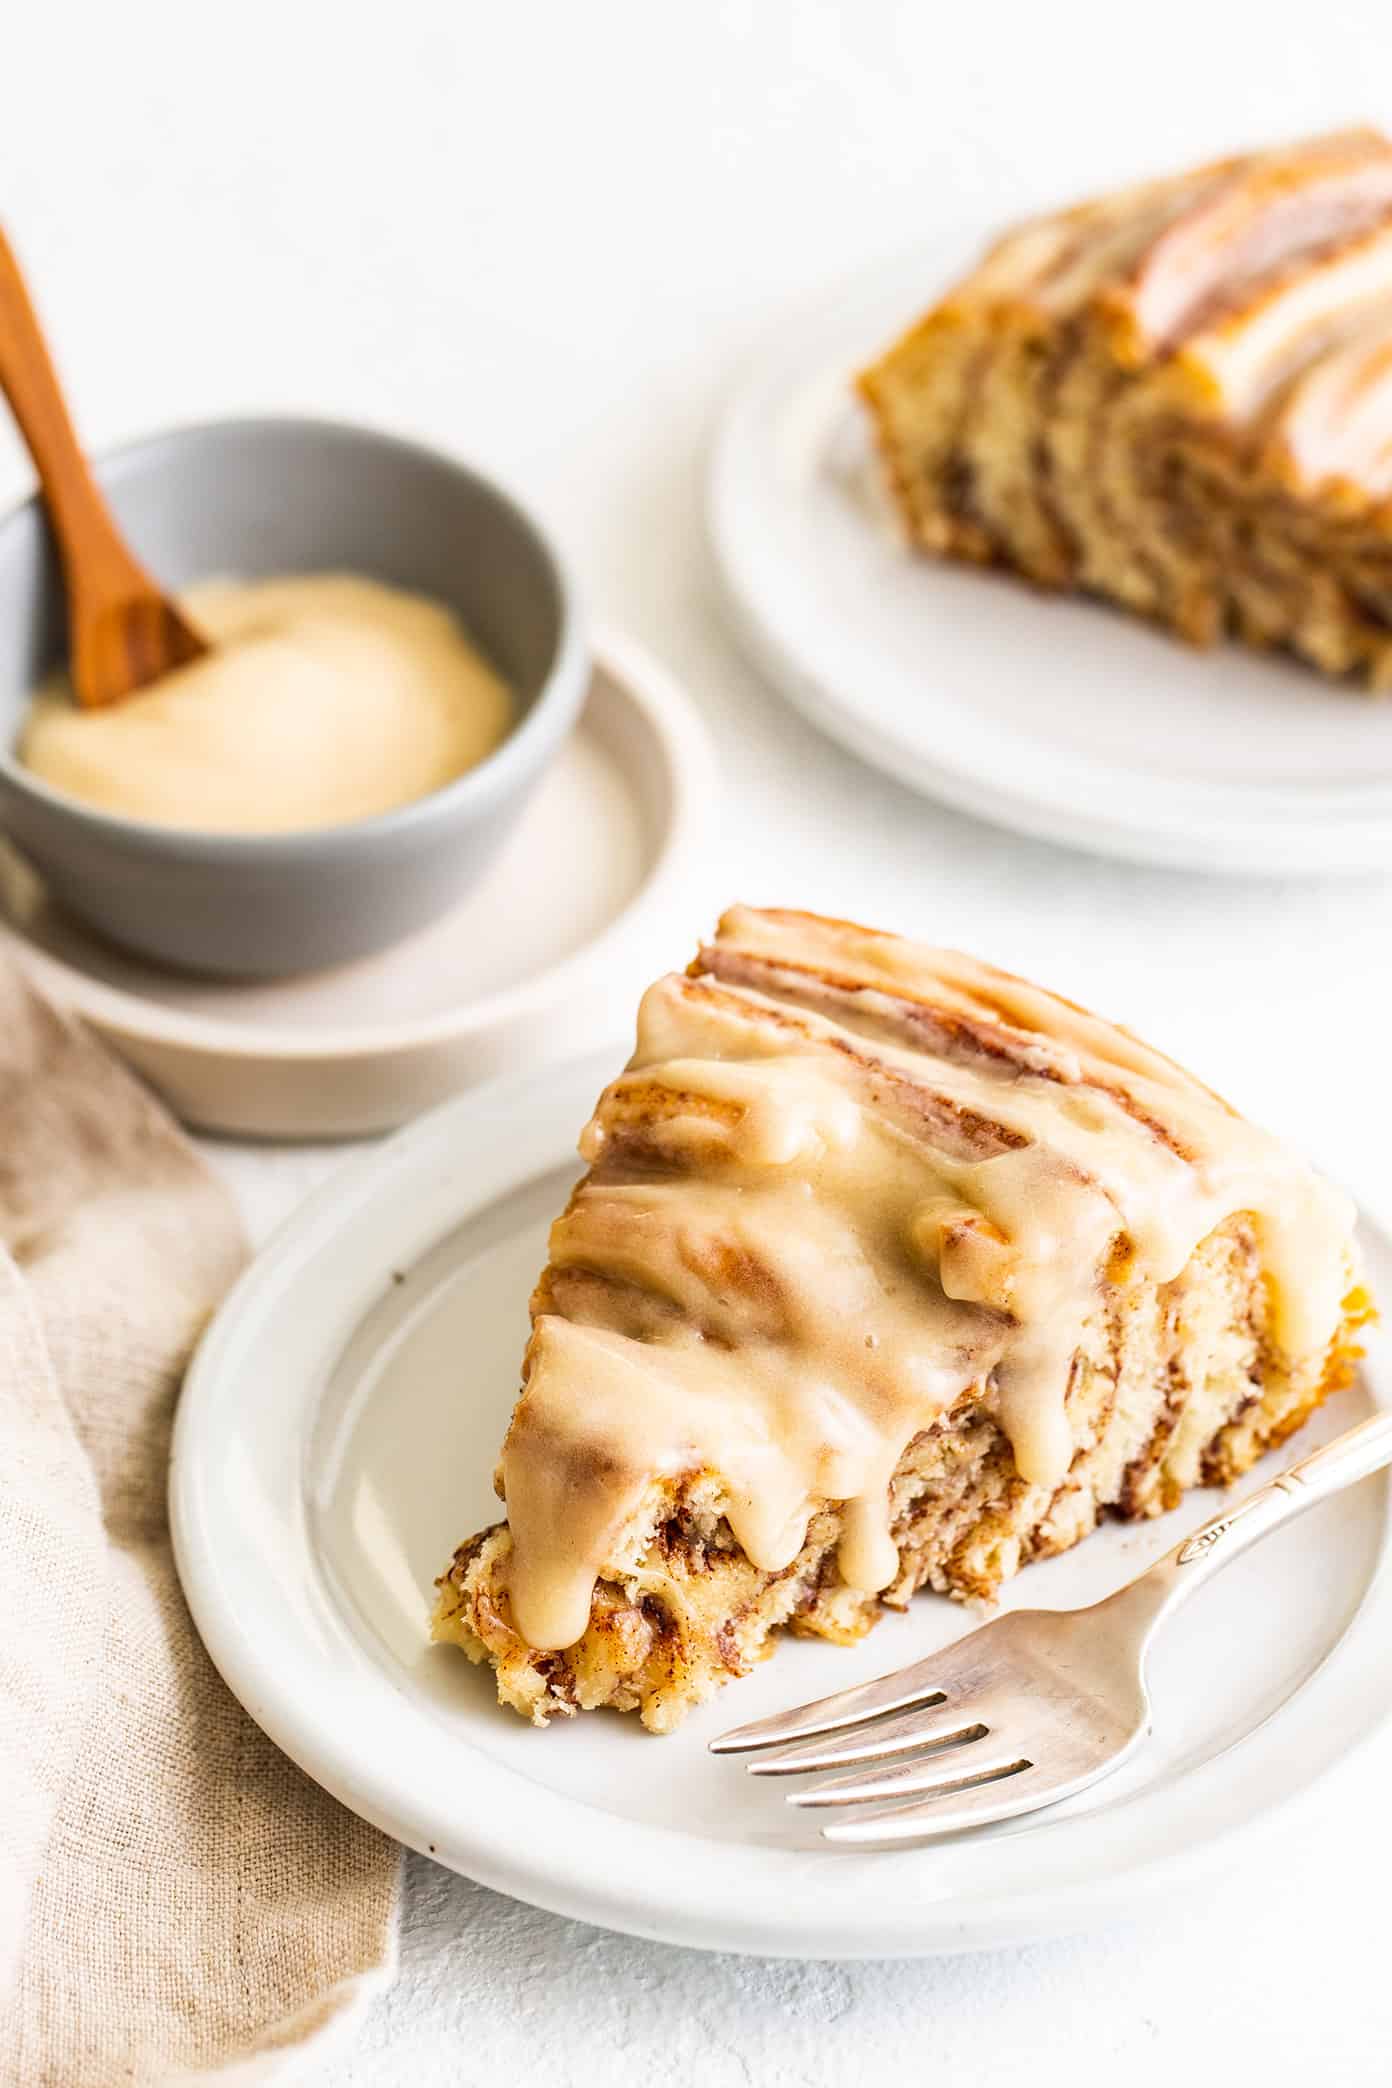 Giant Cinnamon Roll Slices with Cream Cheese Frosting